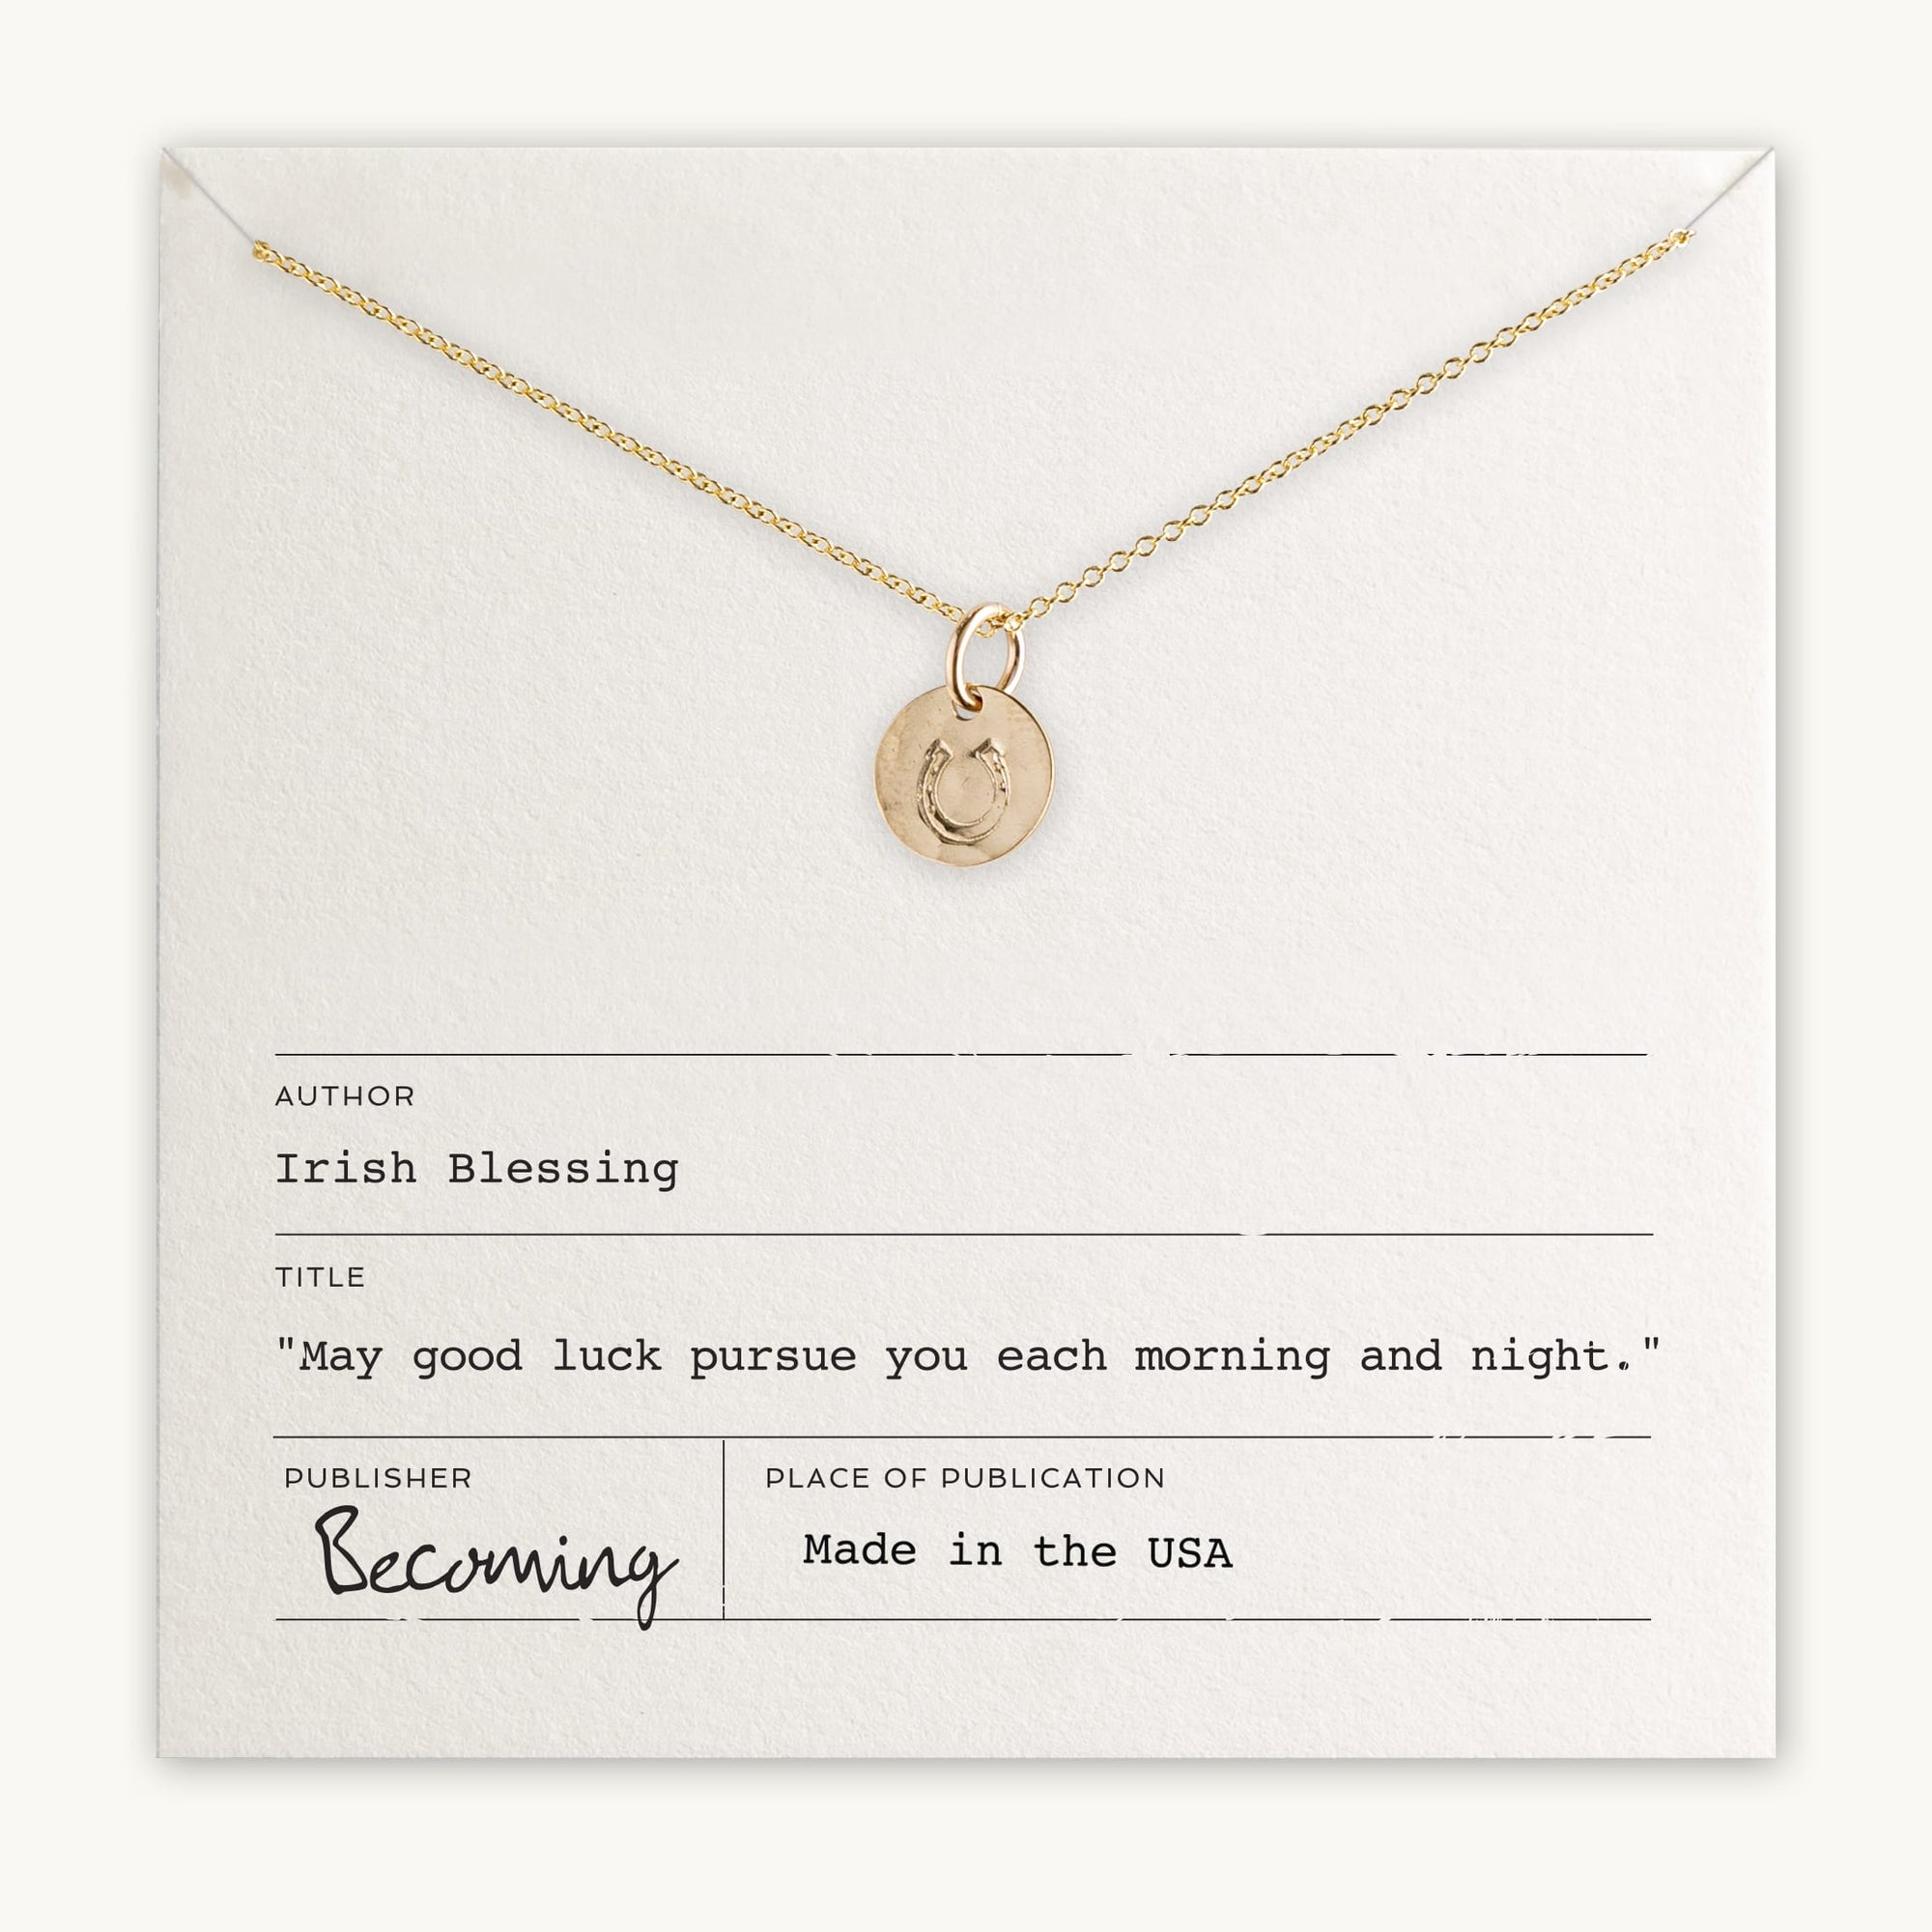 Becoming Jewelry&#39;s Horseshoe pendant necklace with Irish blessing displayed on a card.